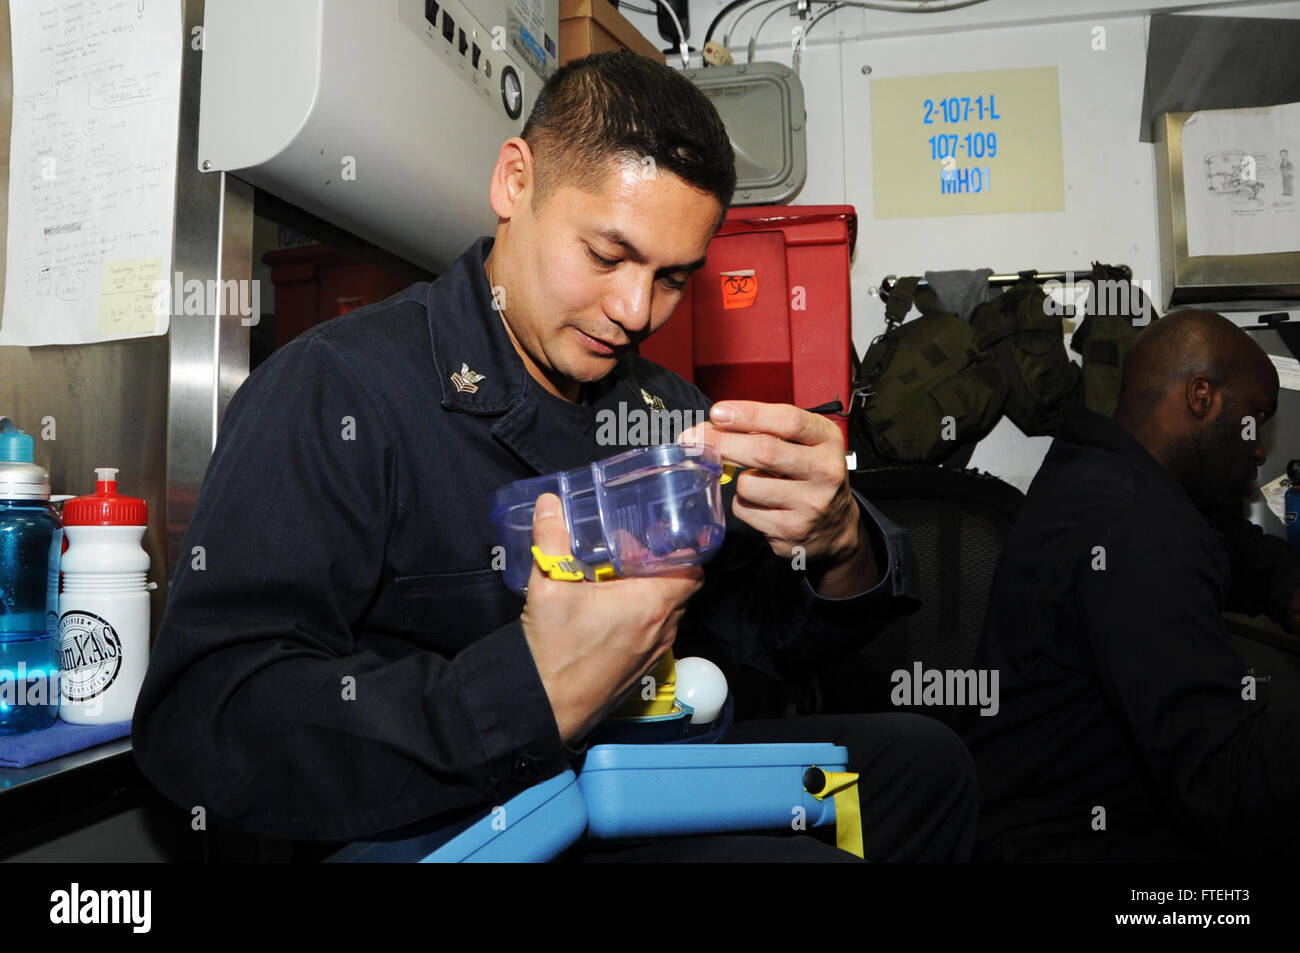 MEDITERRANEAN SEA (Oct. 28, 2014) Hospital Corpsman 1st Class Rejoy Sison, from Milpitas, Calif., practices donning an Emergency Escape Breathing Device (EEBD) aboard the aircraft carrier USS George H.W. Bush (CVN 77). George H.W. Bush, homeported in Norfolk, Va., is conducting naval operations in the U.S. 6th Fleet area of operations in support of U.S. national security interest in Europe. Stock Photo